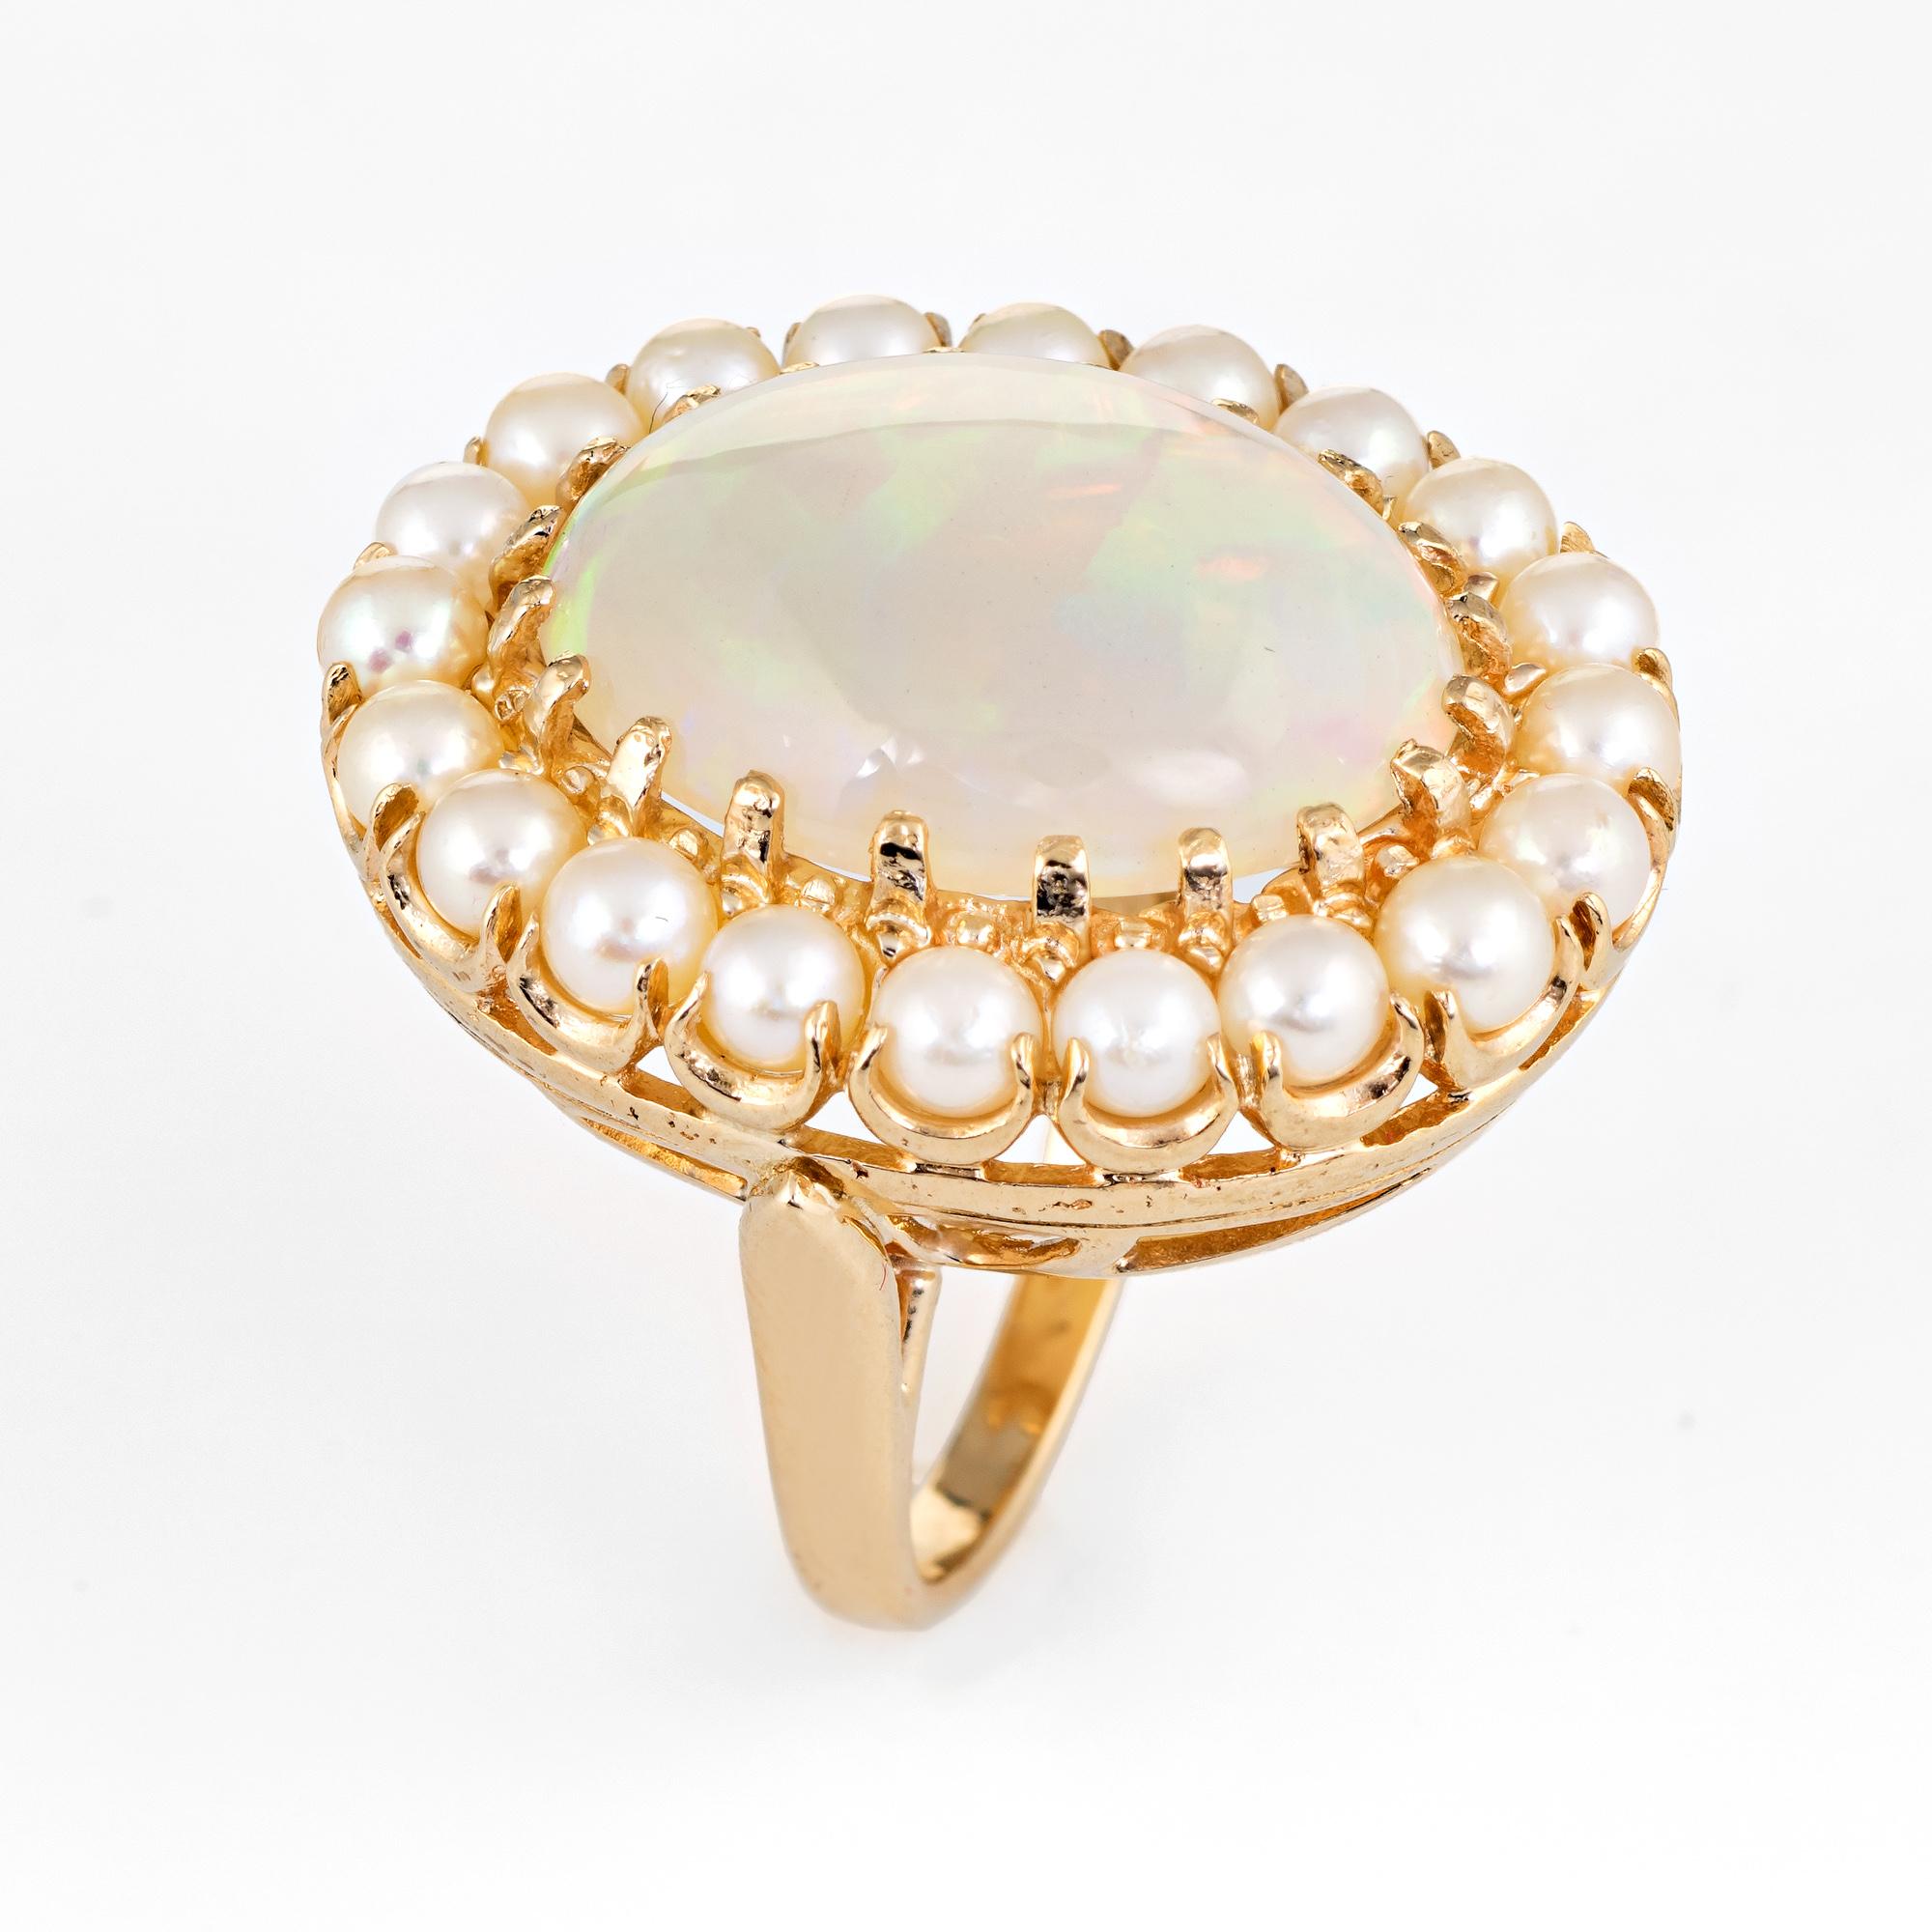 Elegant vintage opal & diamond ring (circa 1950s to 1960s), crafted in 14 karat yellow gold. 

The opal measures 19mm x 15mm (estimated at 8 carats), accented with 20 x 3.5mm cultured pearls. The opal is in excellent condition and free of cracks or